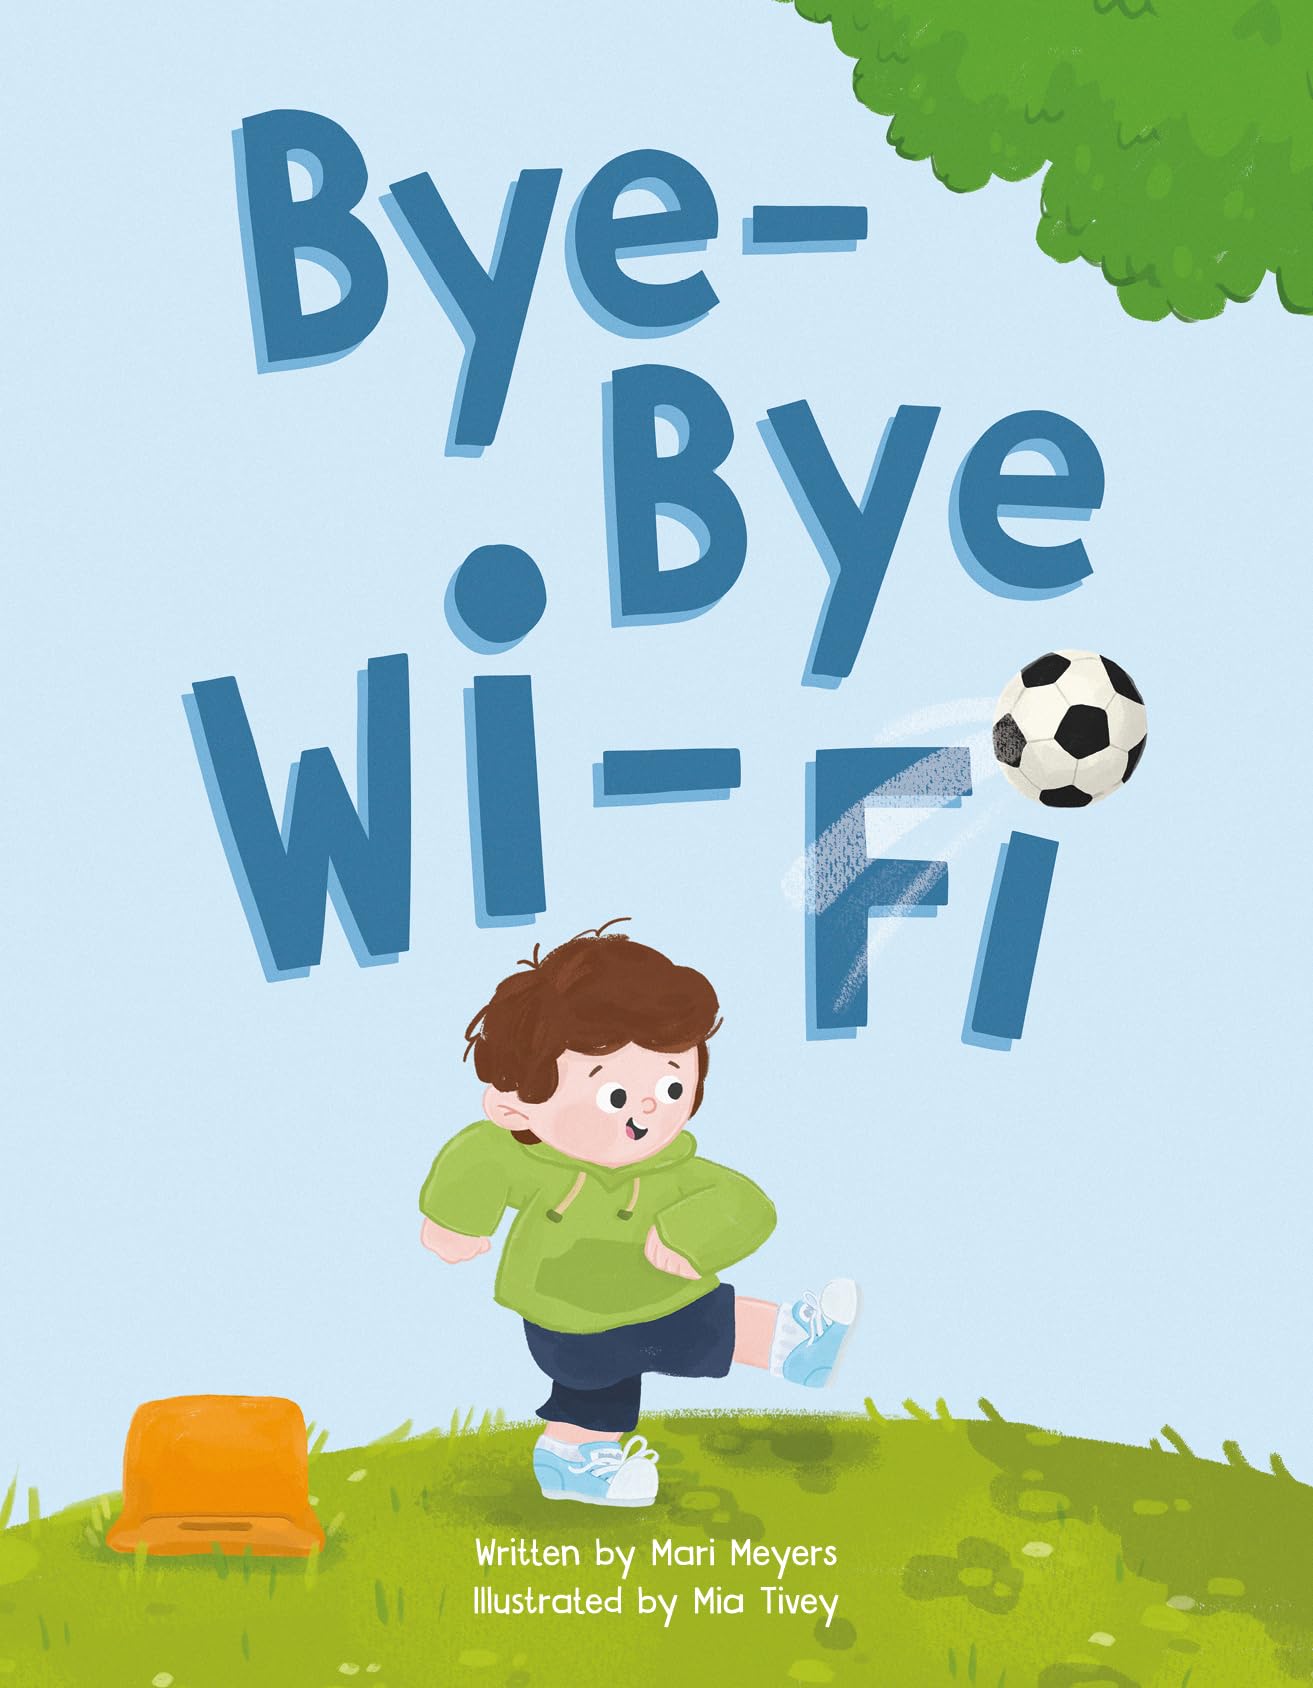 Bye-Bye Wi-Fi: An interactive children's picture book about controlling screen time and choosing creative, educational, and fun home and outdoor activities.